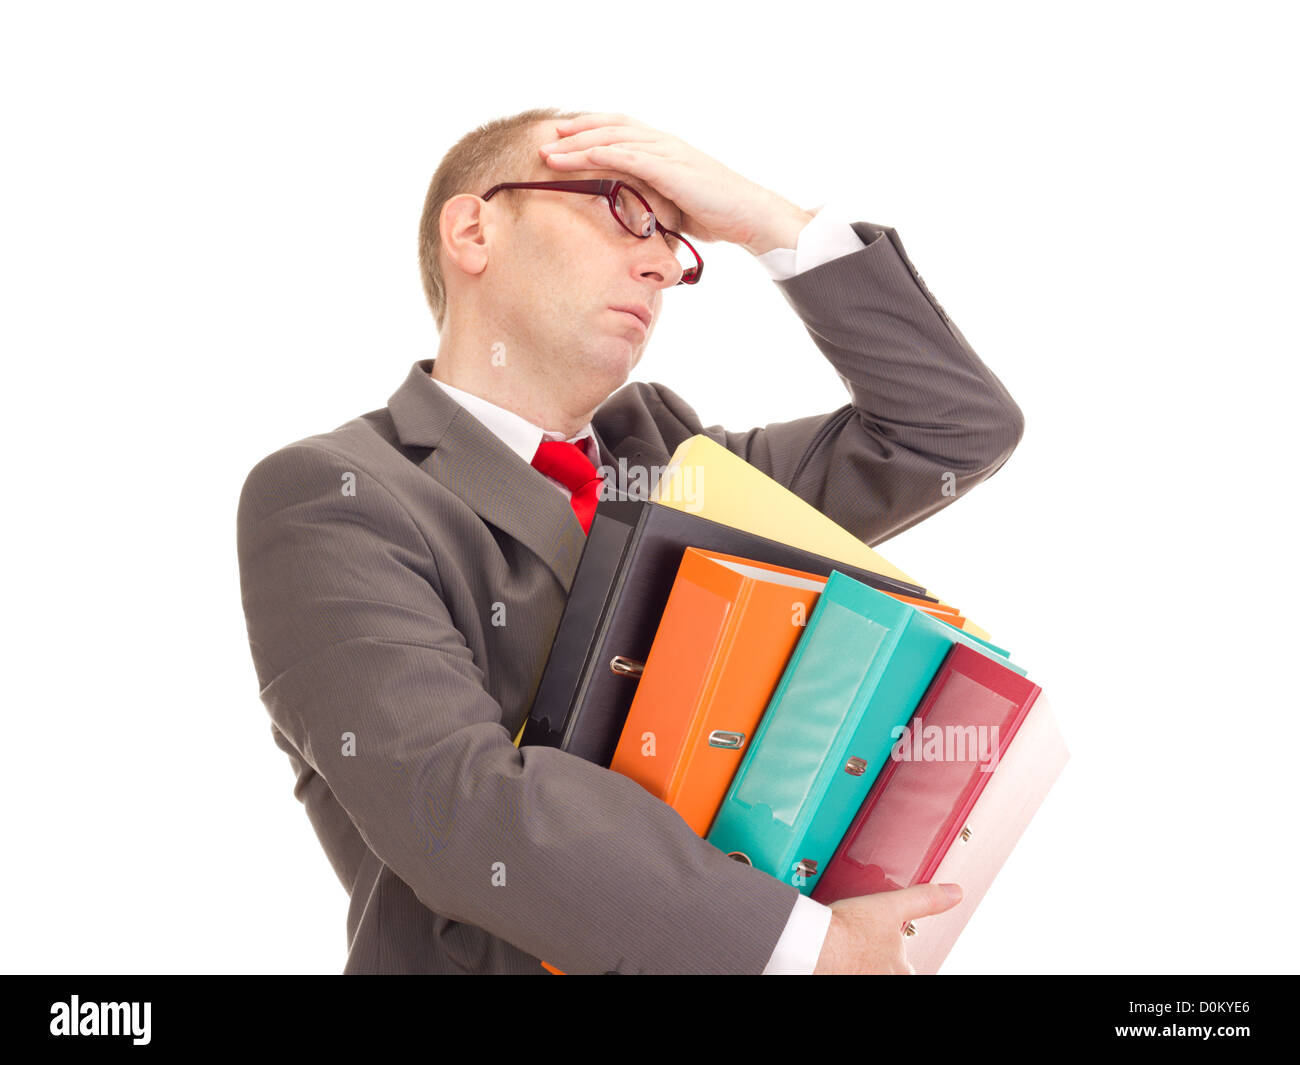 Businessman with ring binder Stock Photo